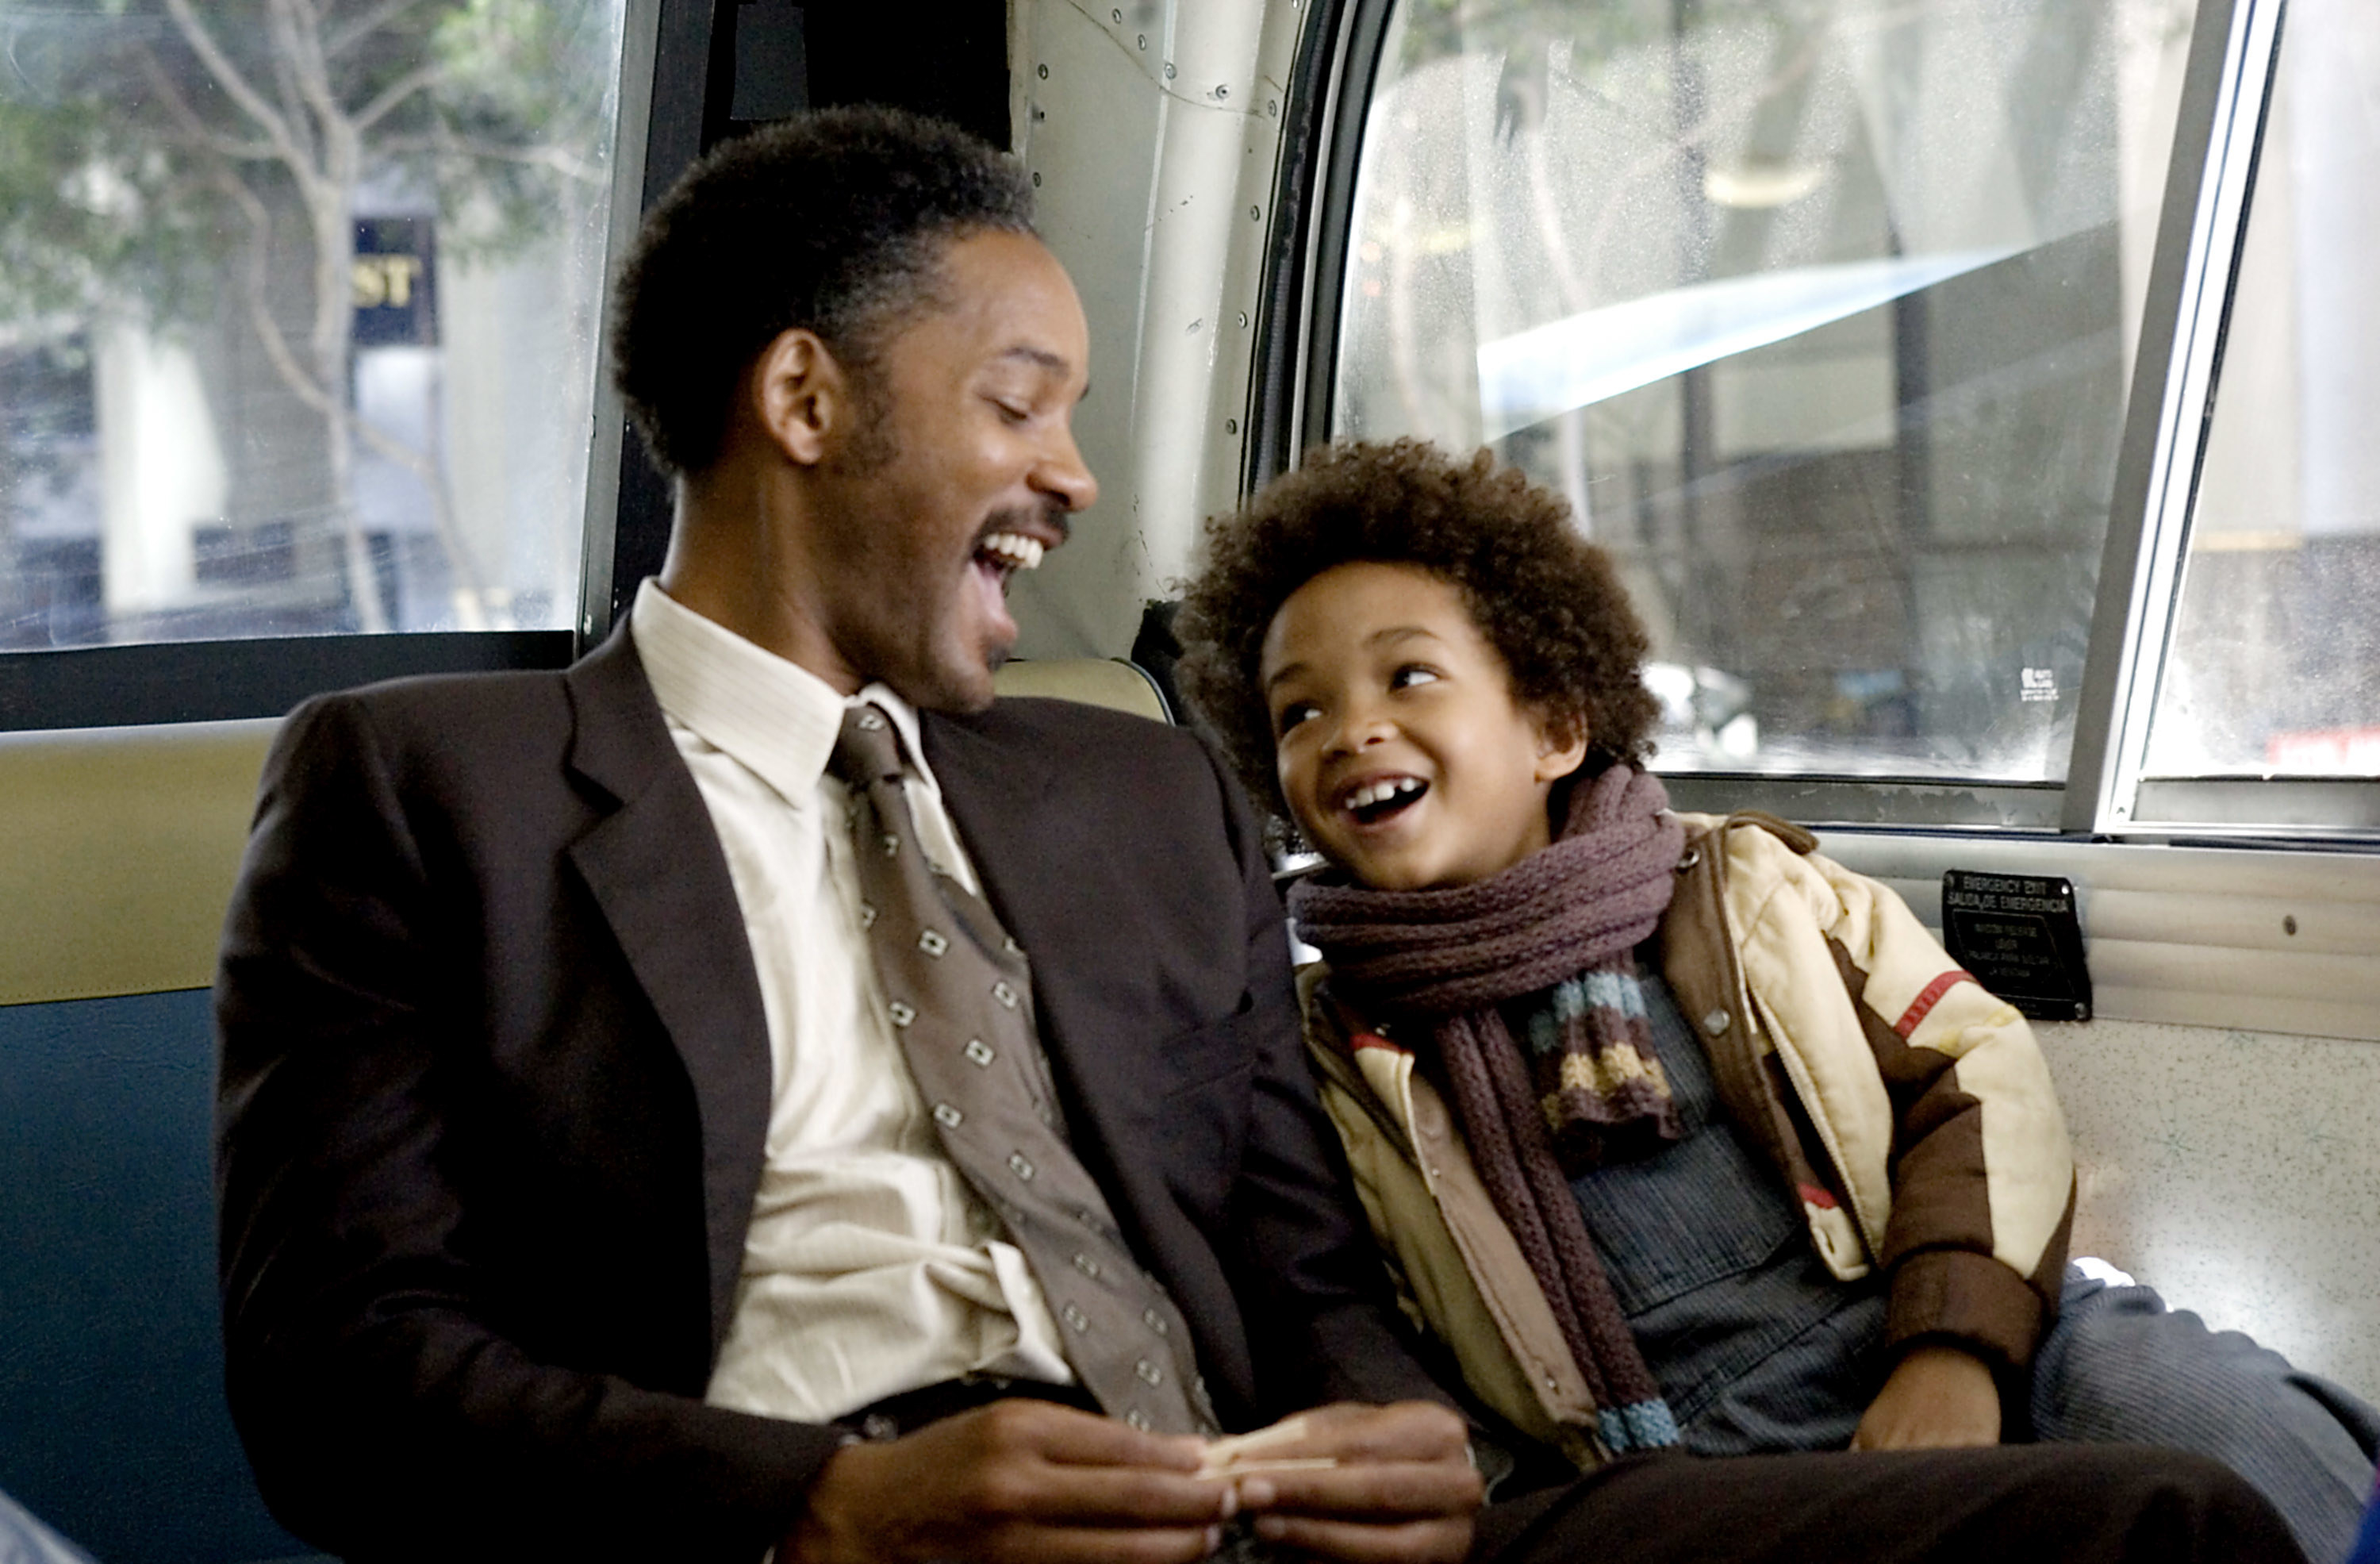 jadan and will laughing on a bus in the movie